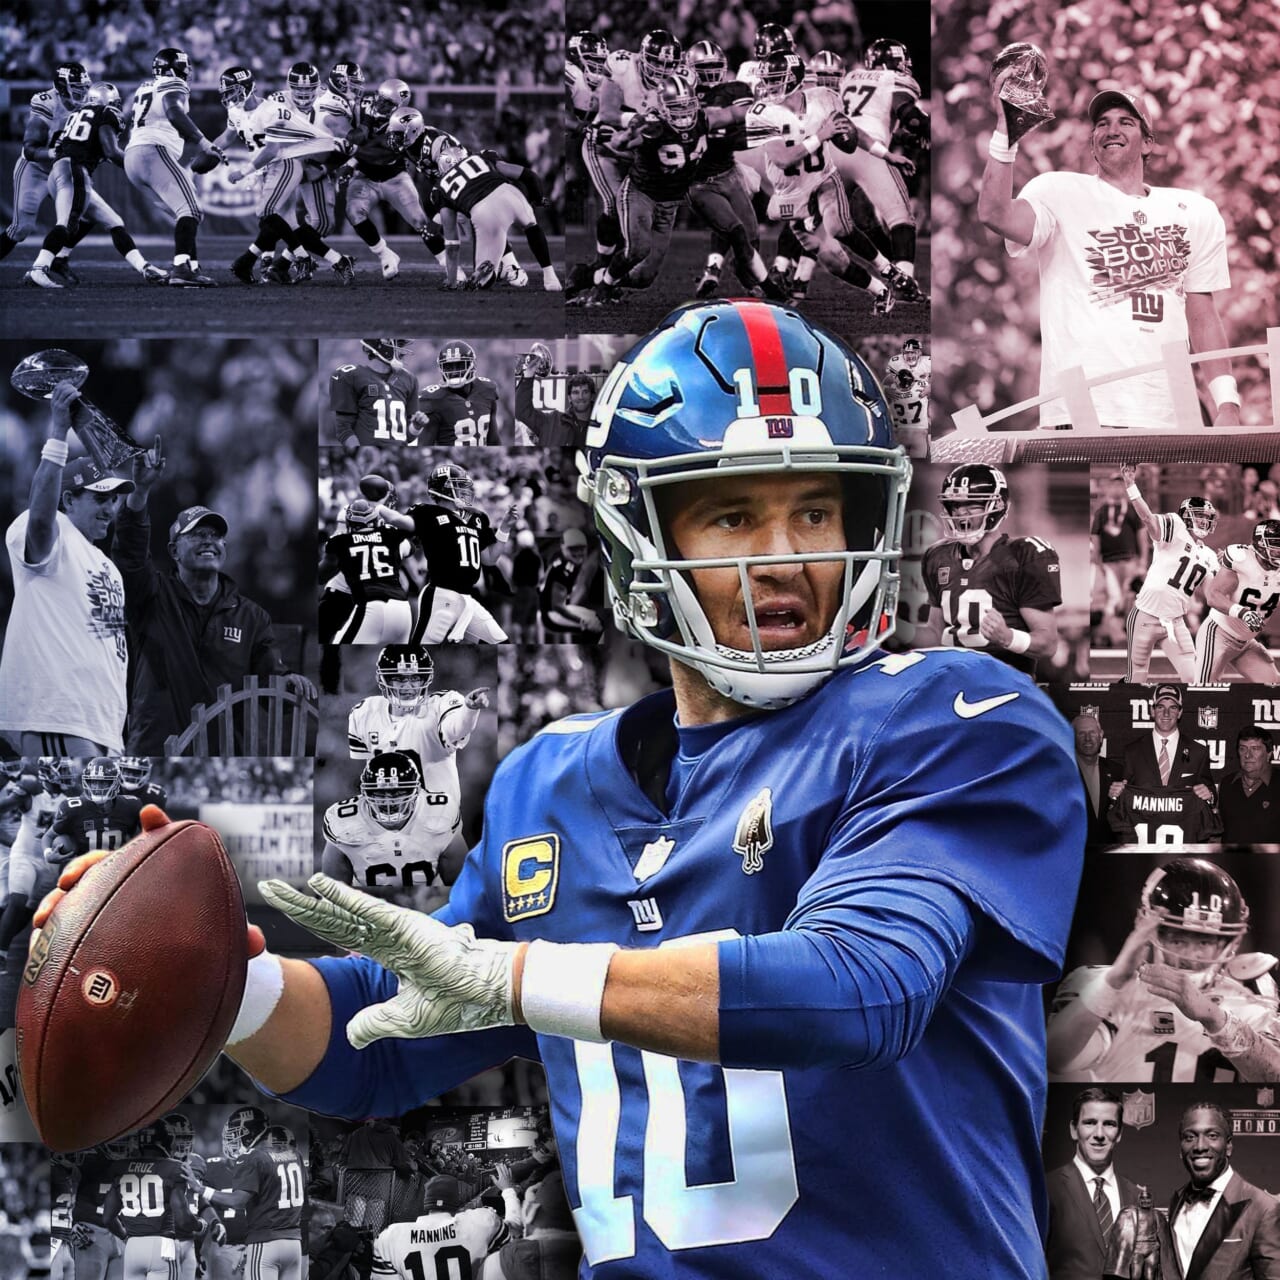 New York Giants: Will Eli Manning Get His Final Farewell?